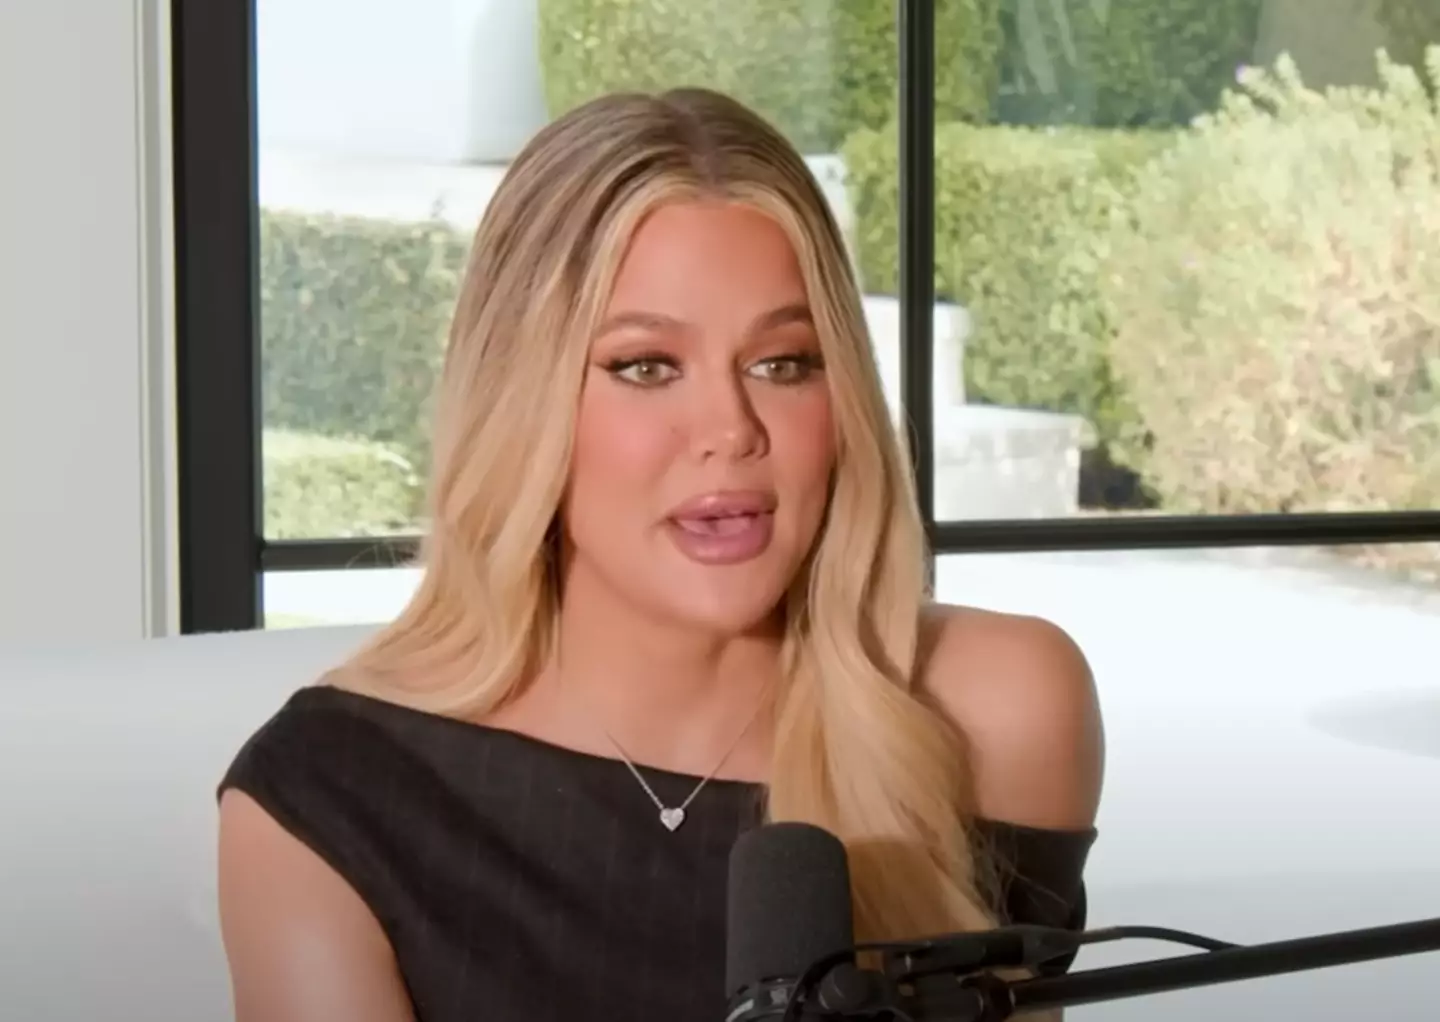 Khloé opened up about her parenting struggles on a podcast. (She MD)